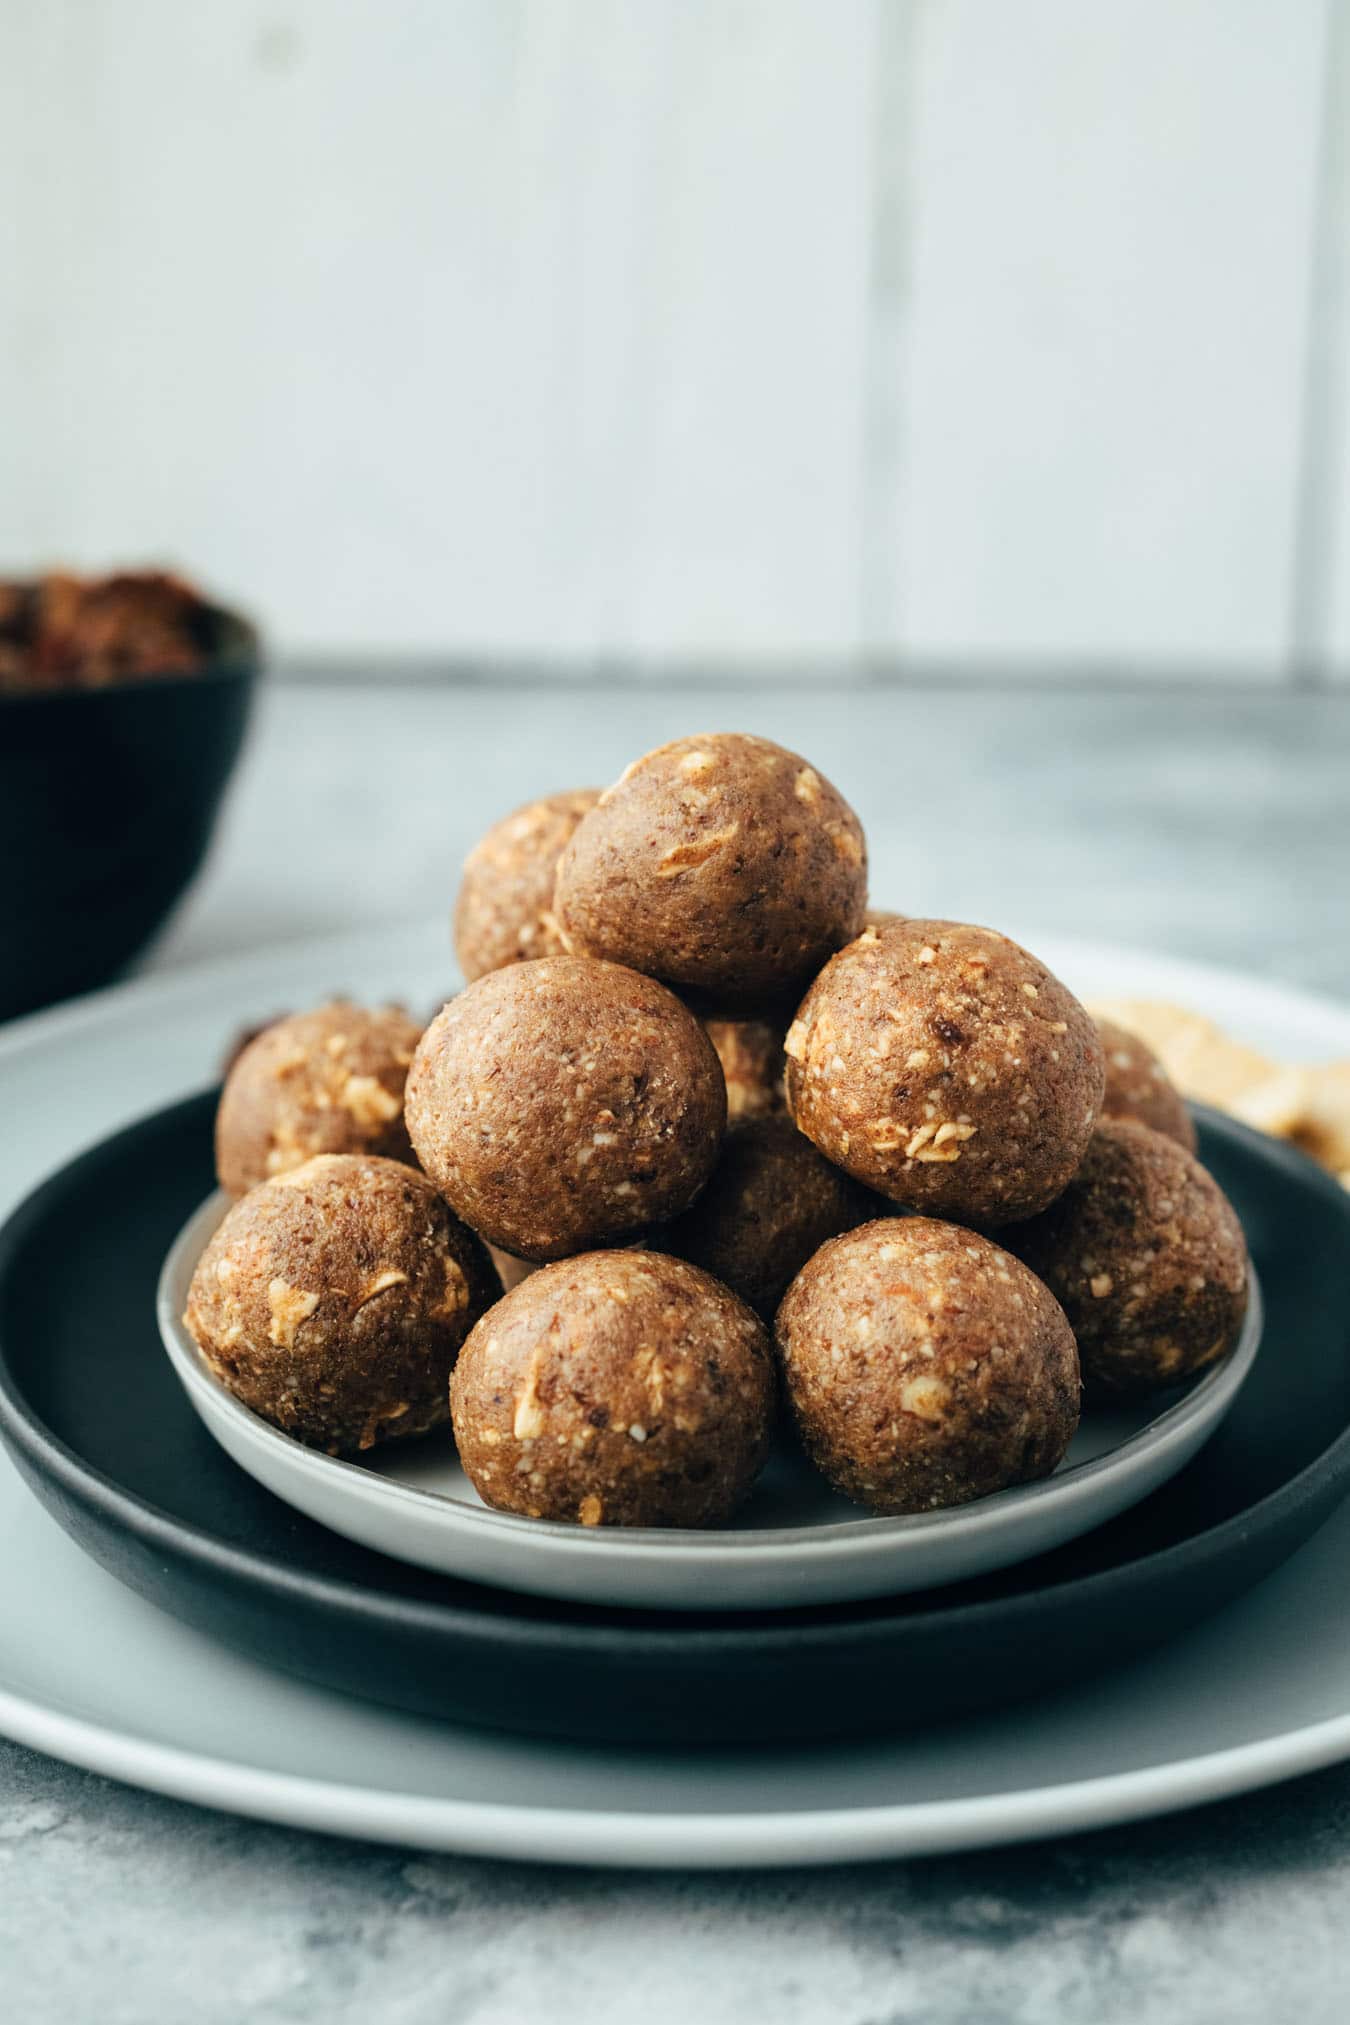 Bliss Balls Baked Apple Style (15 minutes)